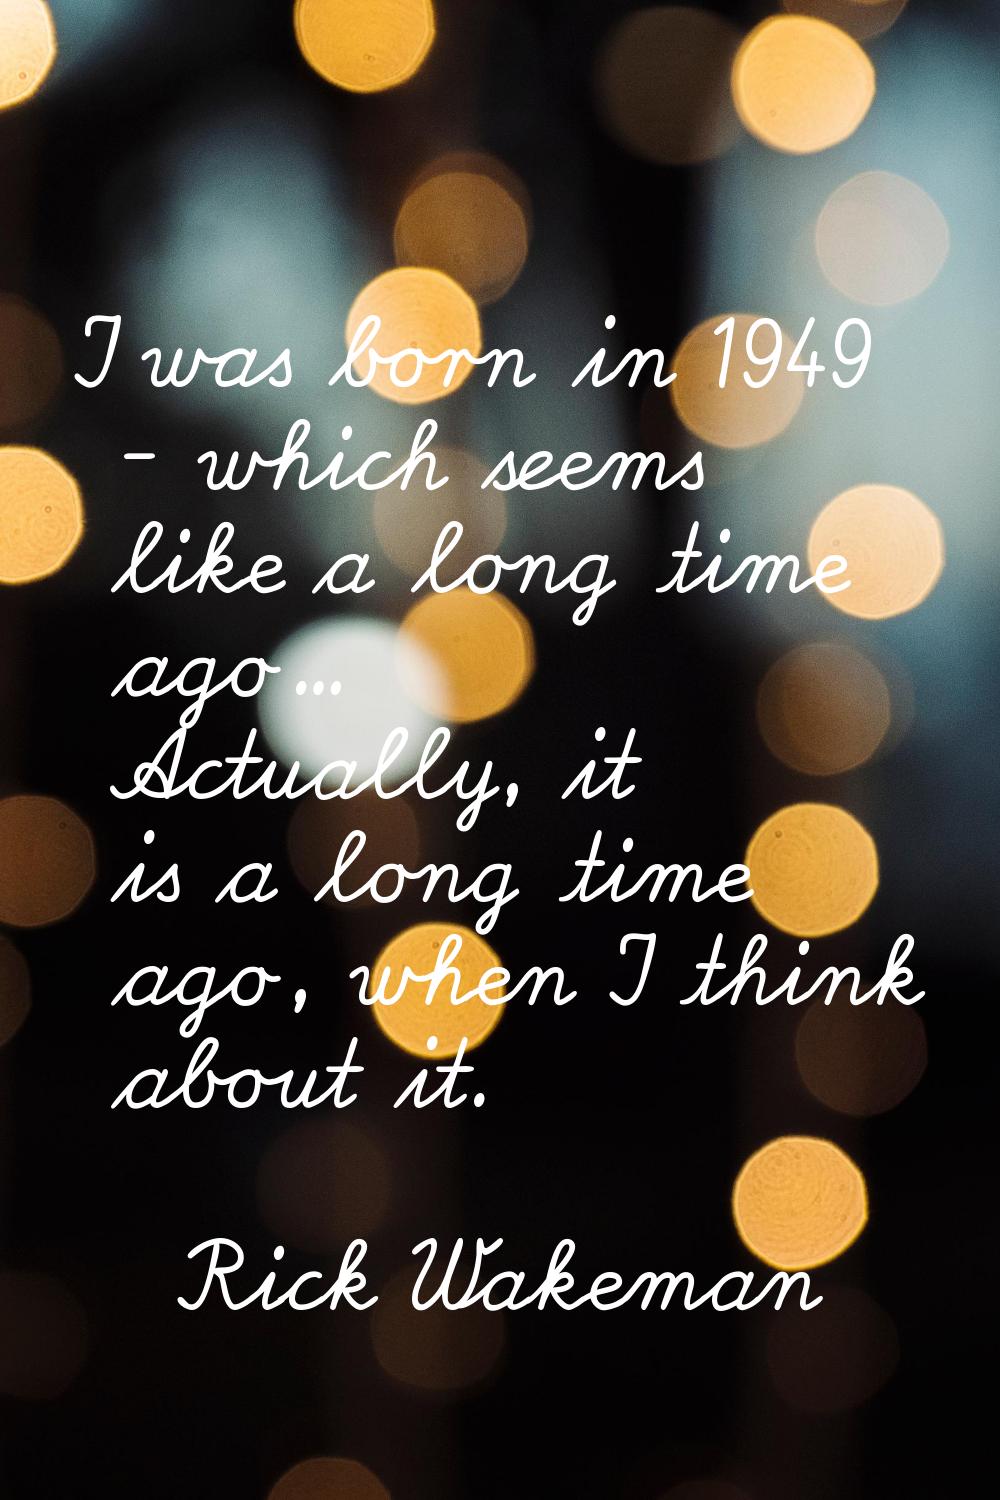 I was born in 1949 - which seems like a long time ago... Actually, it is a long time ago, when I th